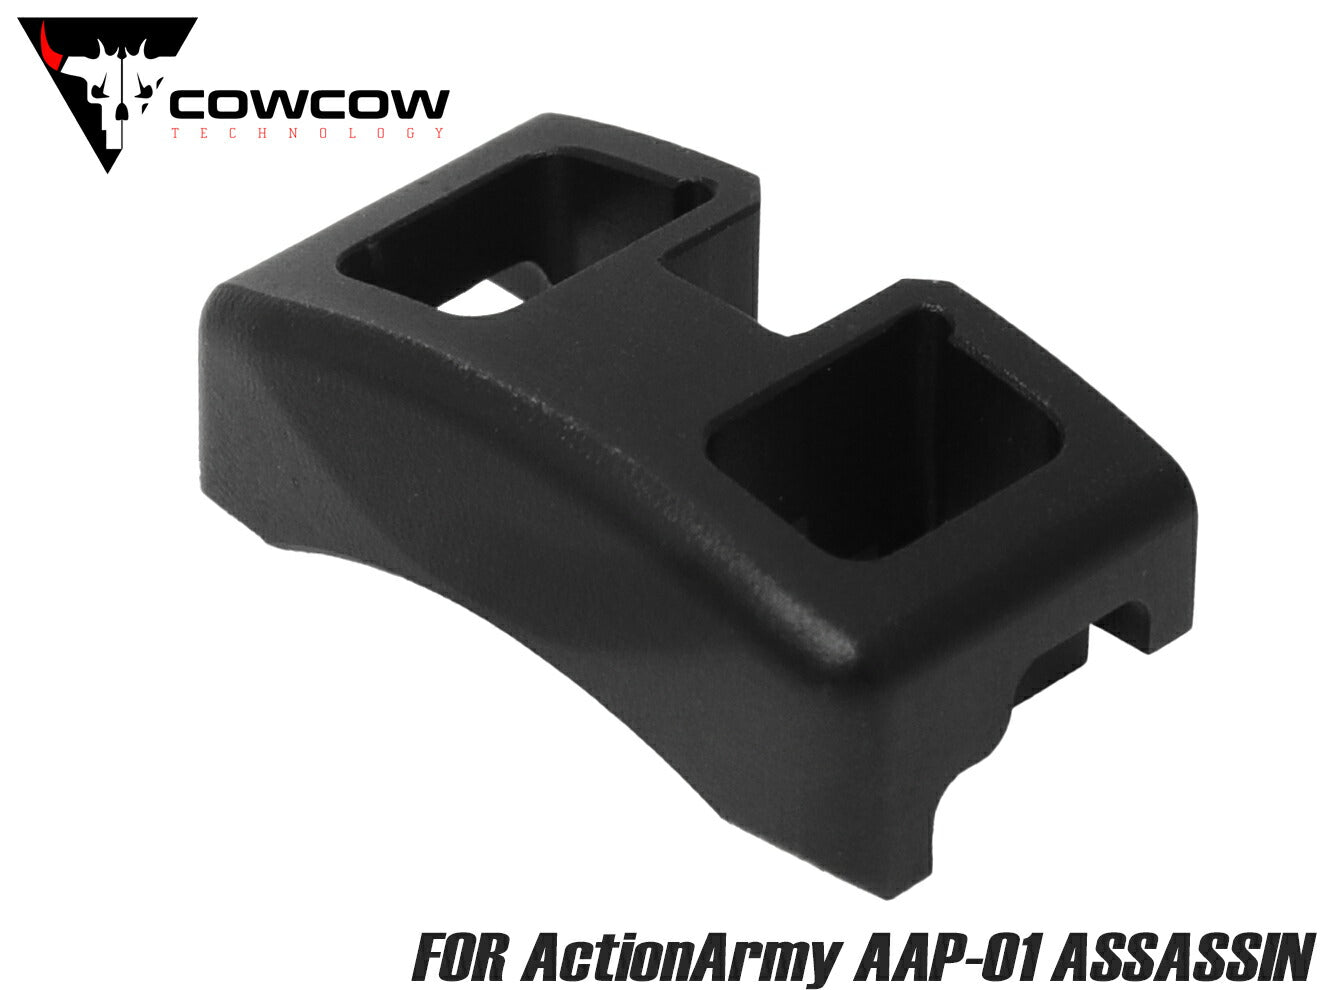 COW-AAP-MP001B　COWCOW TECHNOLOGY アルミCNC T01 マグウェル for ActionArmy AAP-01